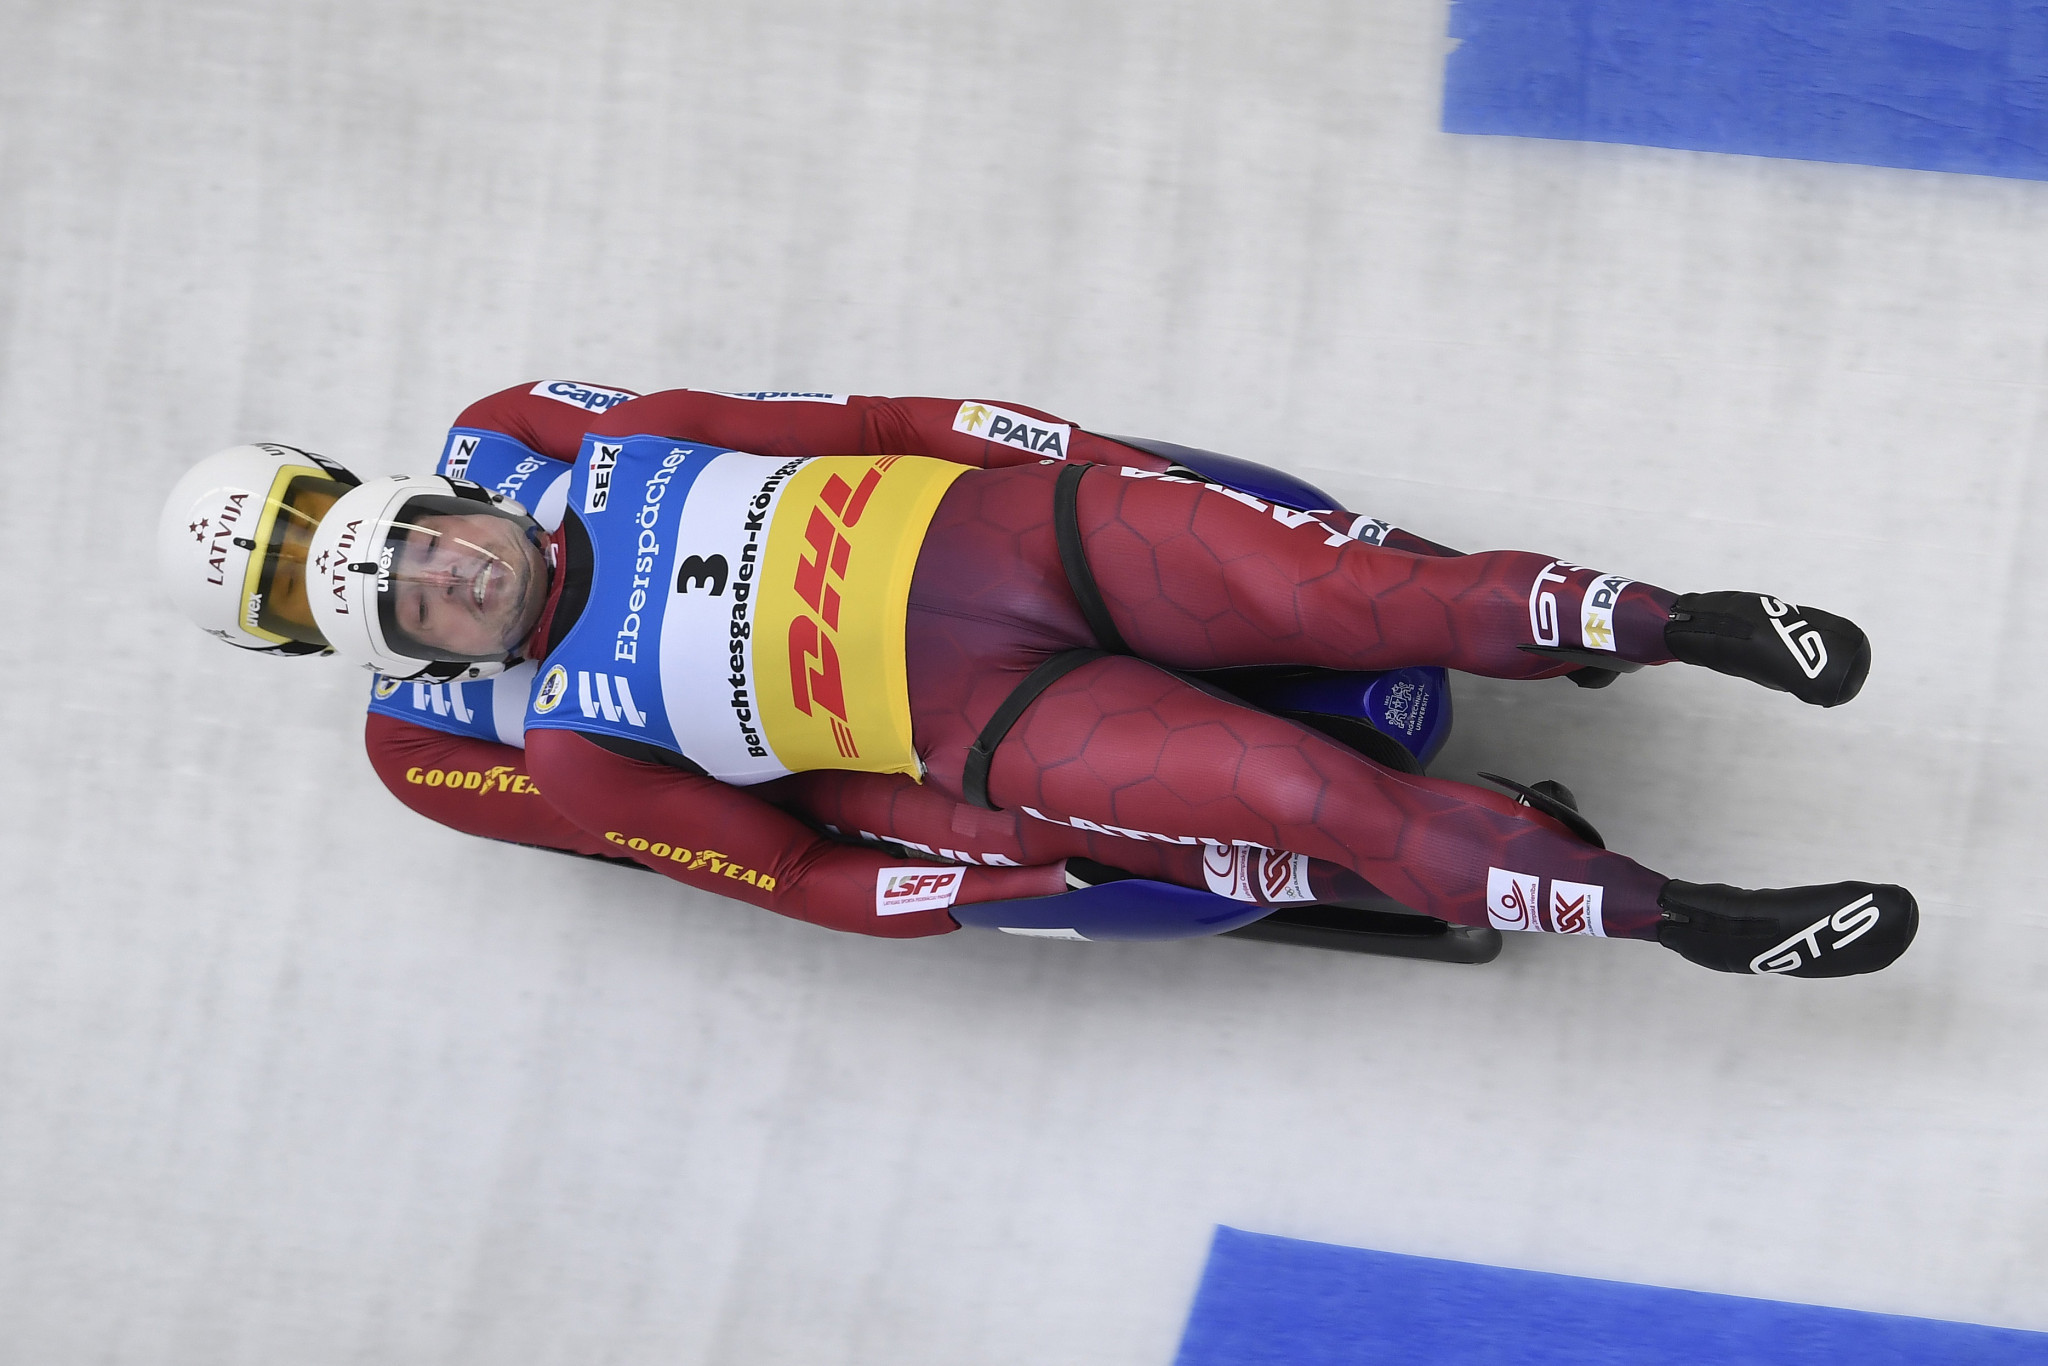 Šics brothers and Loch exact revenge at Luge World Cup leg in Sigulda